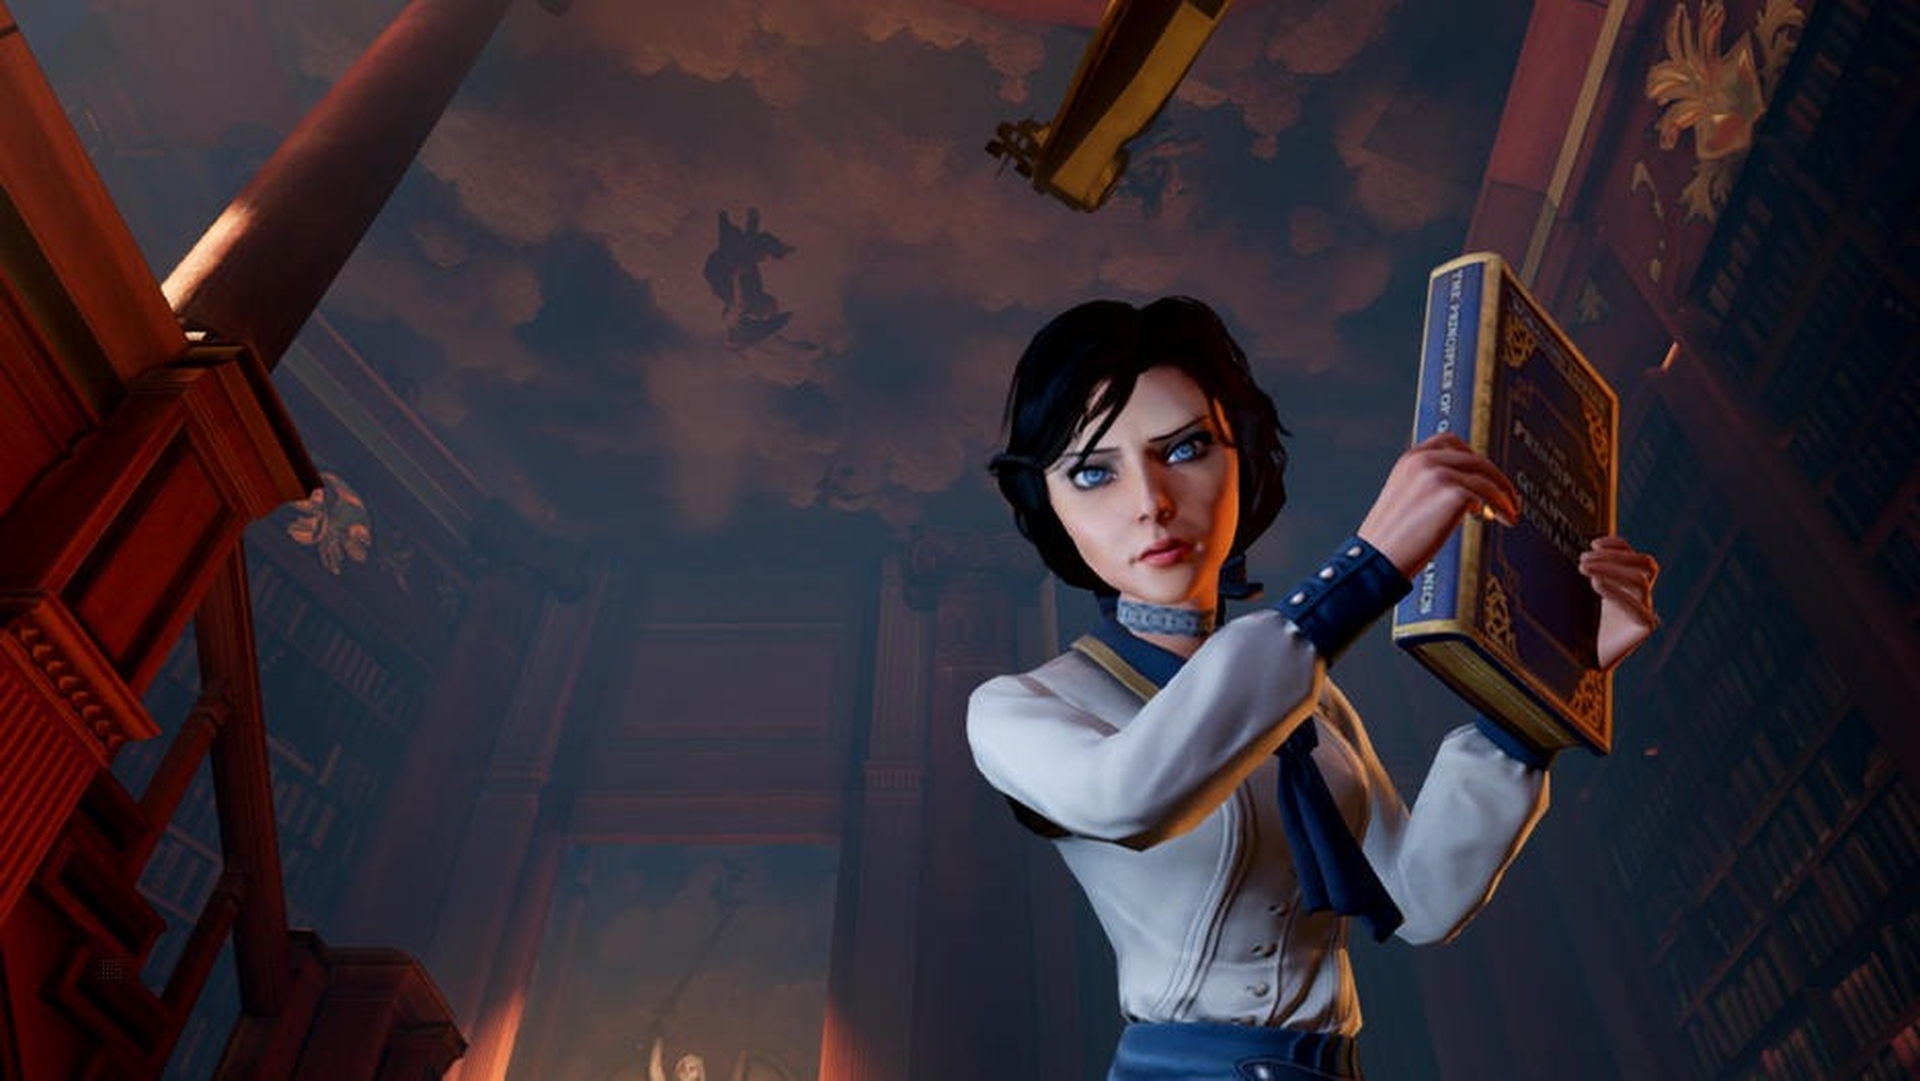 In this article, we are going to be covering the free giveaway of Bioshock The Collection Epic Games, which is a part of the mystery game giveaways from Epic Games.